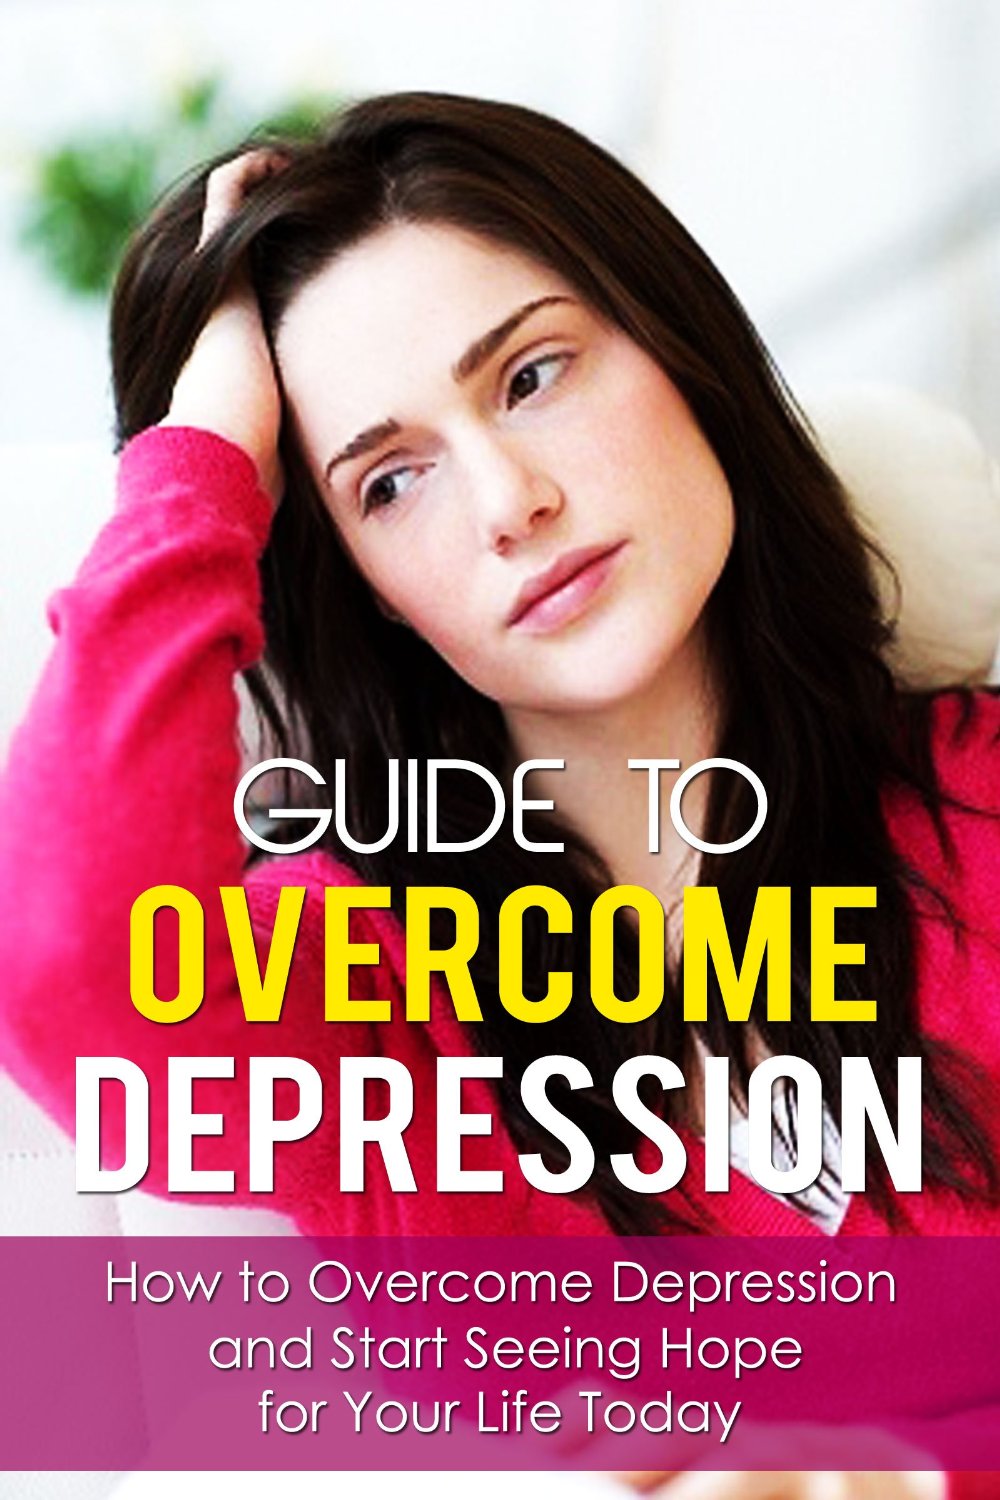 Guide To Overcome Depression – How to Overcome Depression and Start Seeing Hope for Your Life Today by G. Leblanc